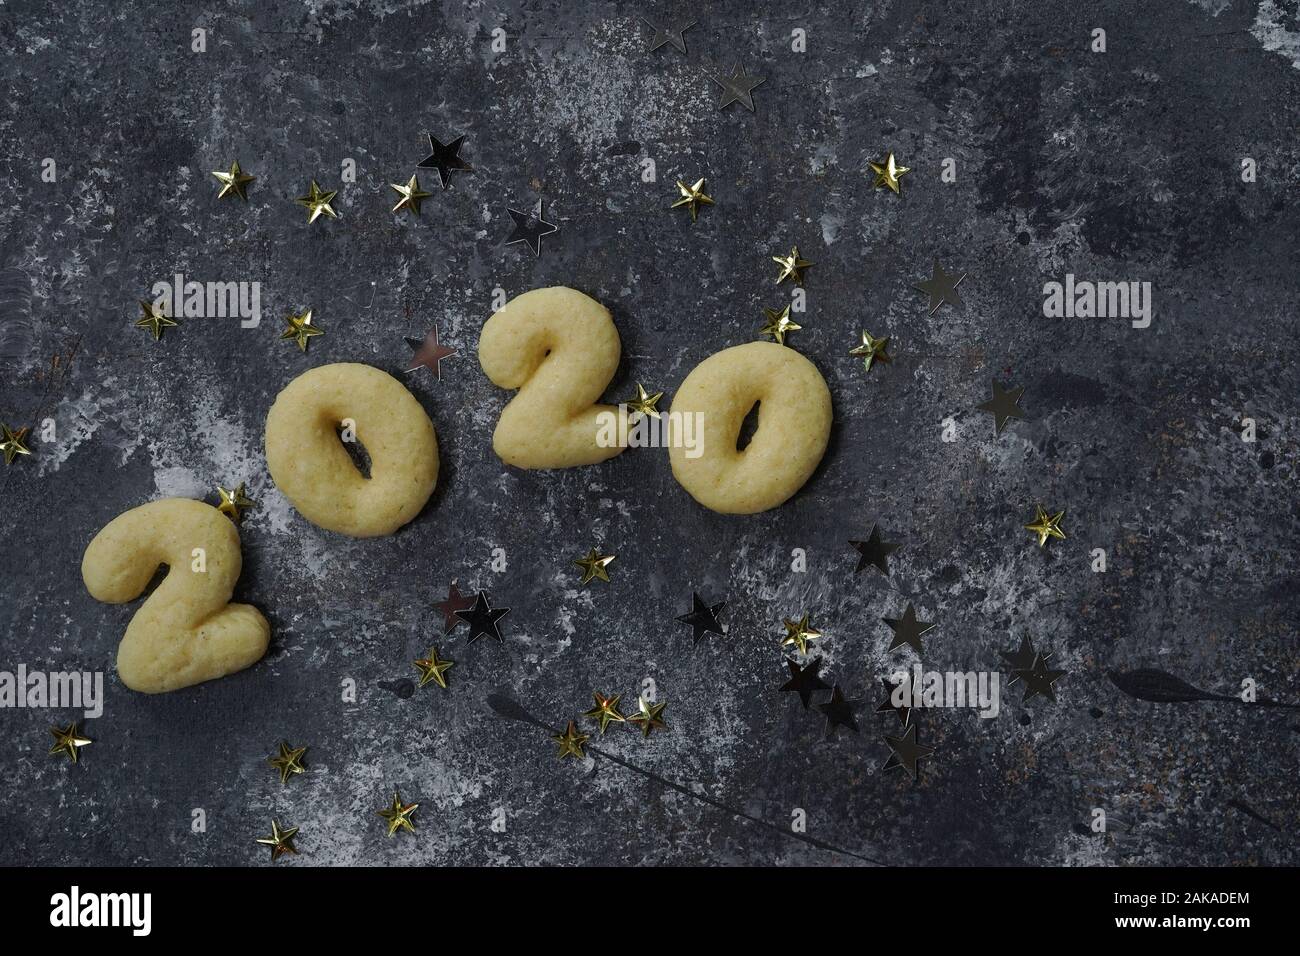 New year cookies background in 2020 shape Stock Photo